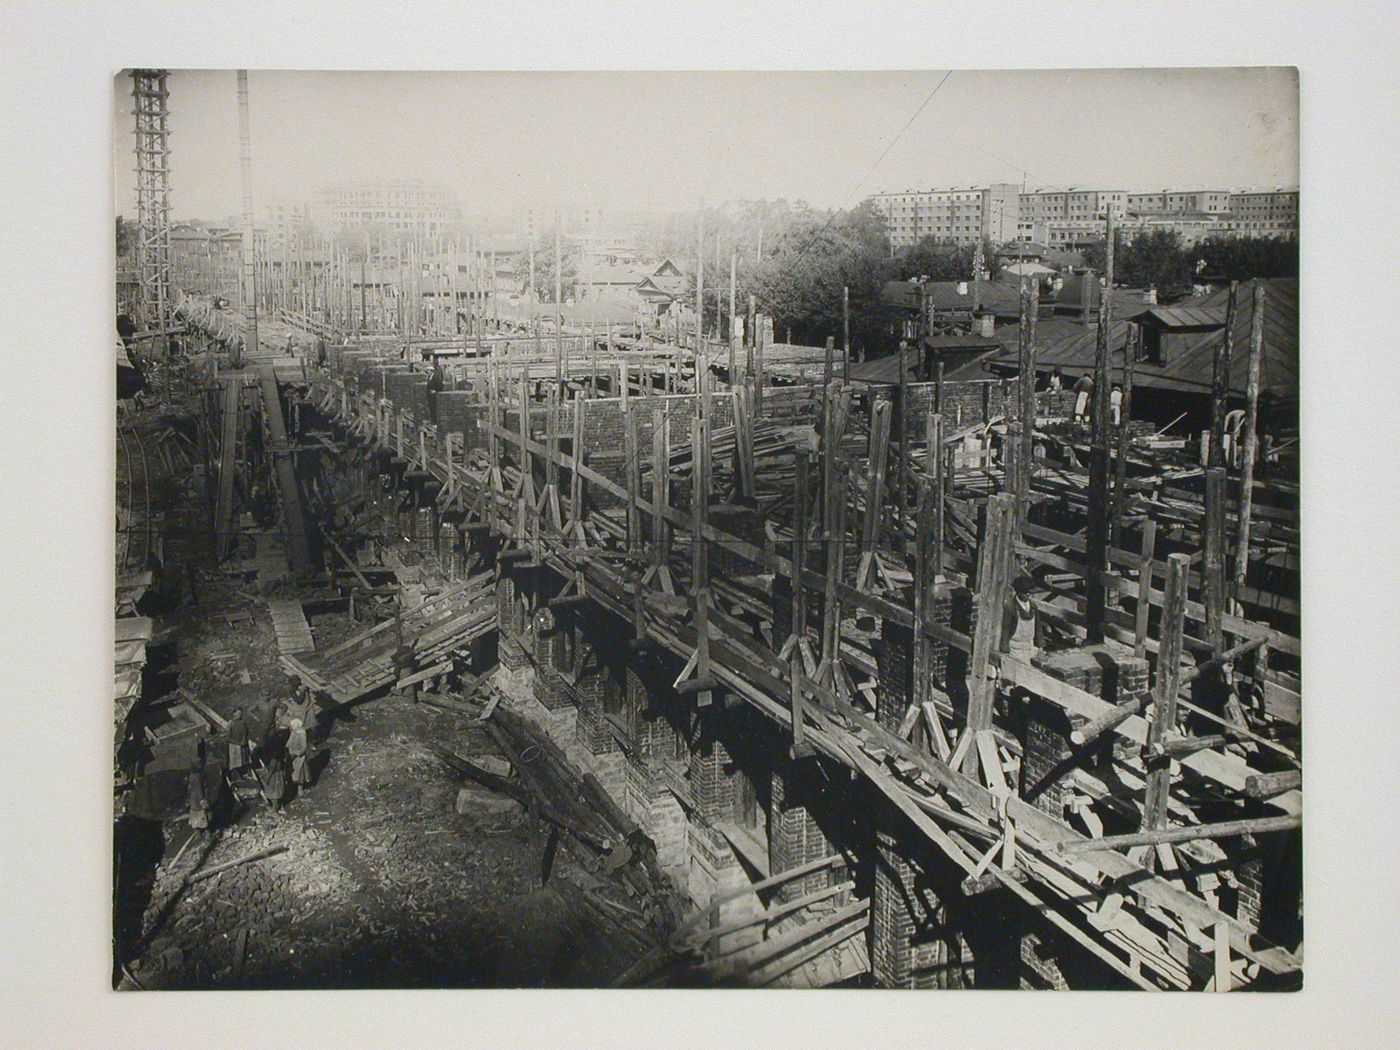 View of the Building of Industry construction site showing scaffolding, Sverdlovsk, Soviet Union (now Ekaterinburg, Russia)